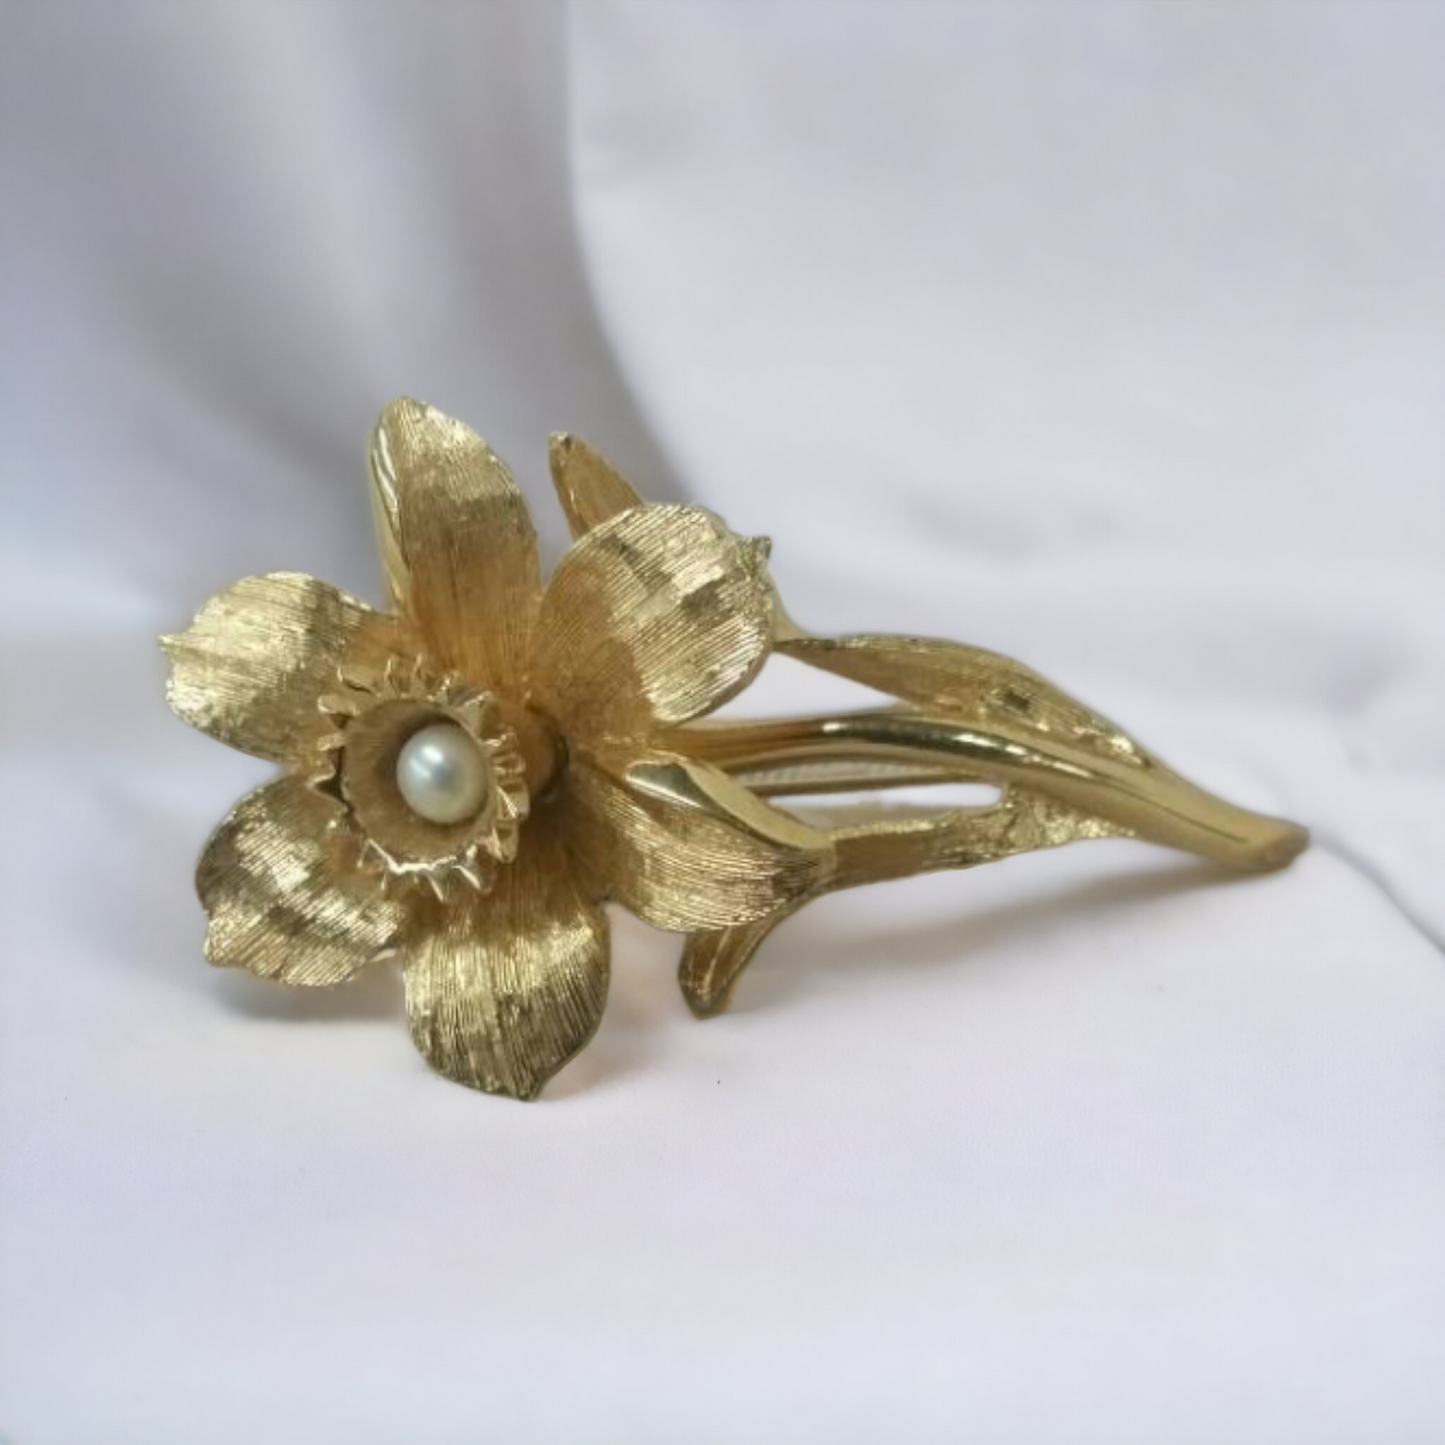 Vintage D'orlan Flower Brooch With Pearl Center